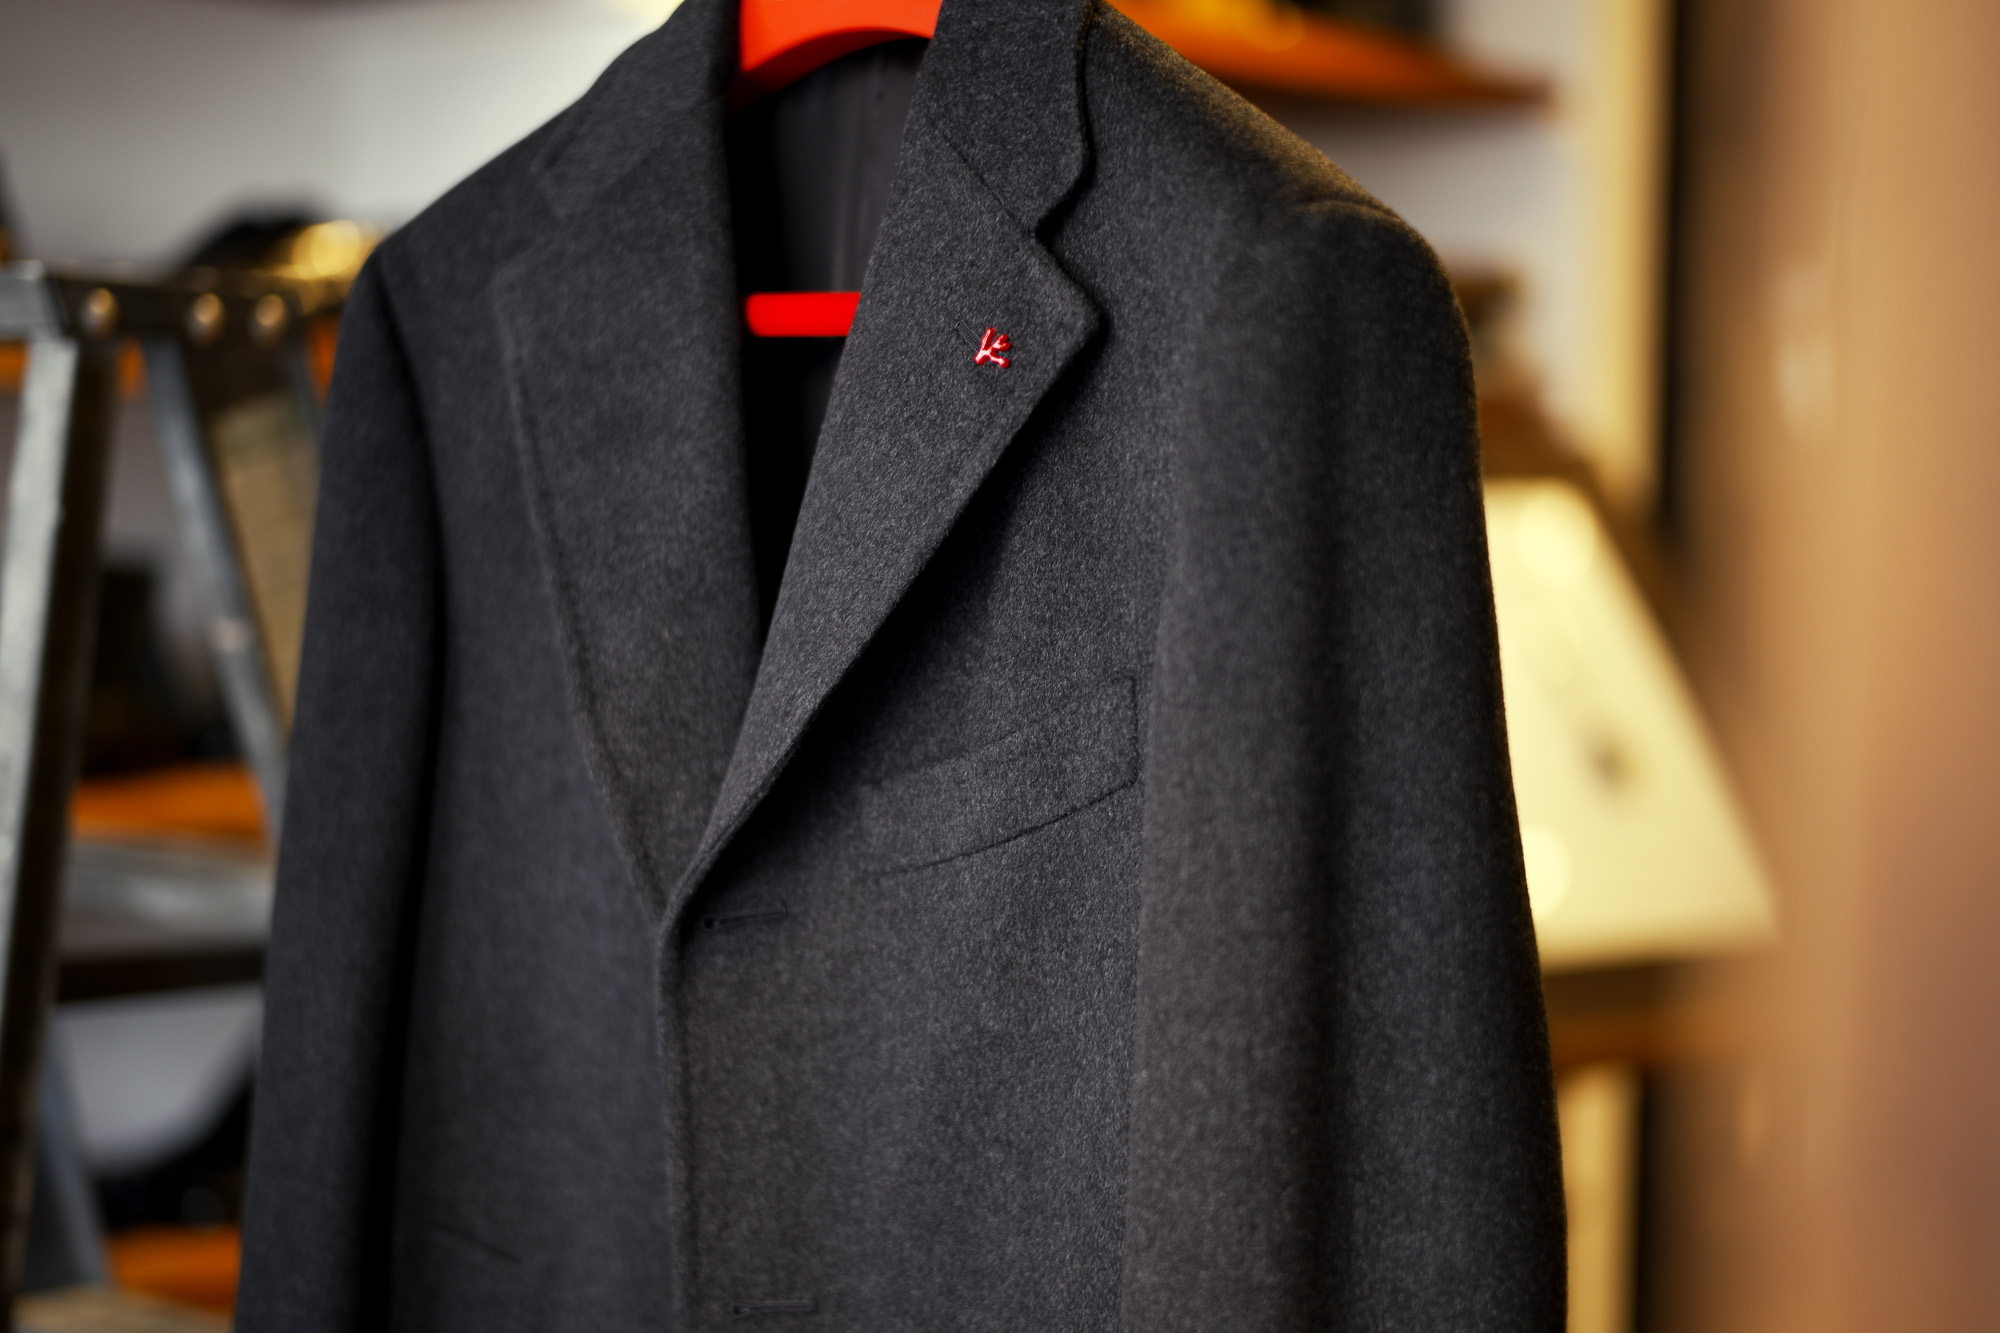 ISAIA "MADE TO MEASURE" ROSS CP TASCH TRENCH BEAVER CHARCOAL GRAY 2021AW イザイア オーダー ロス トレンチコート ビーバー チャコールグレー 2021秋冬 愛知 名古屋 Alto e Diritto altoediritto アルトエデリット